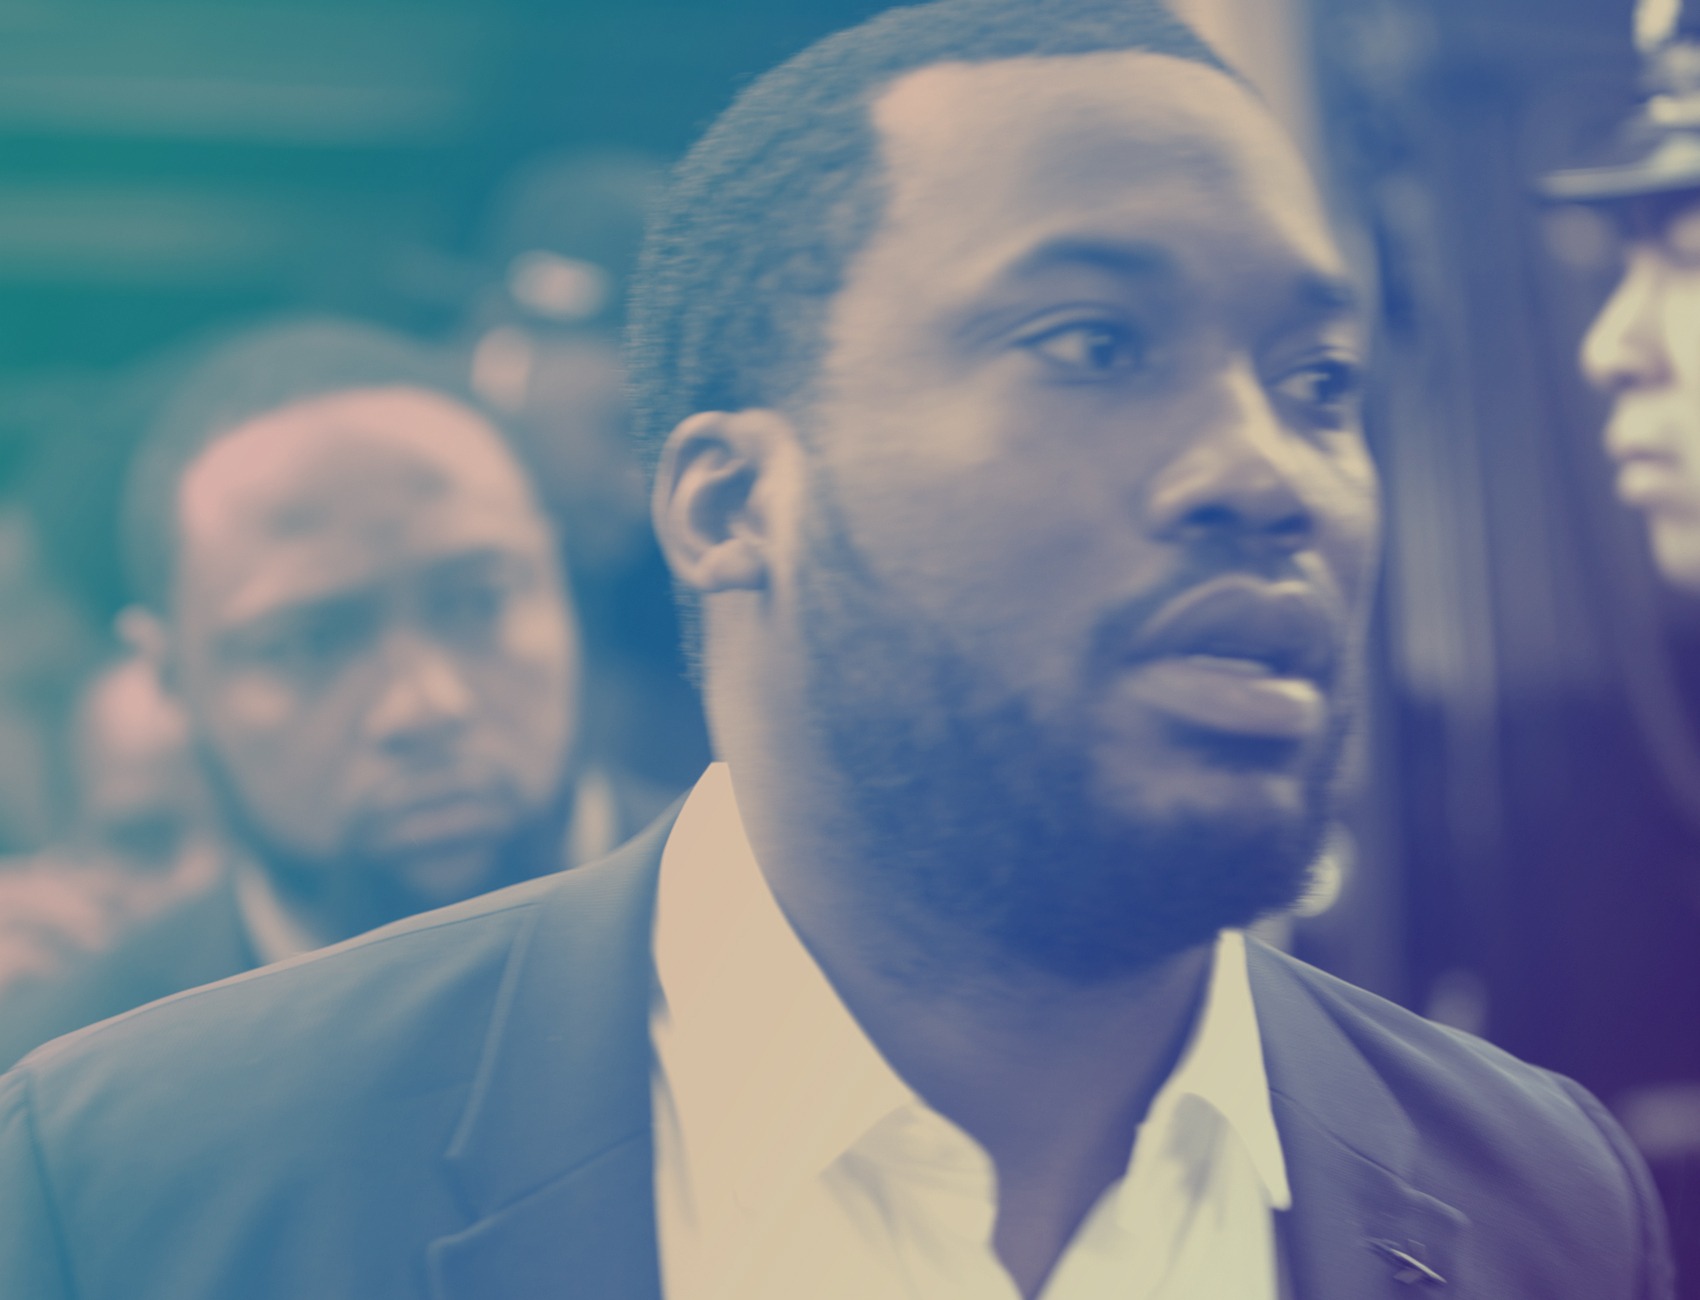 Meek Mill goes deep for Philadelphia kids caught in justice system